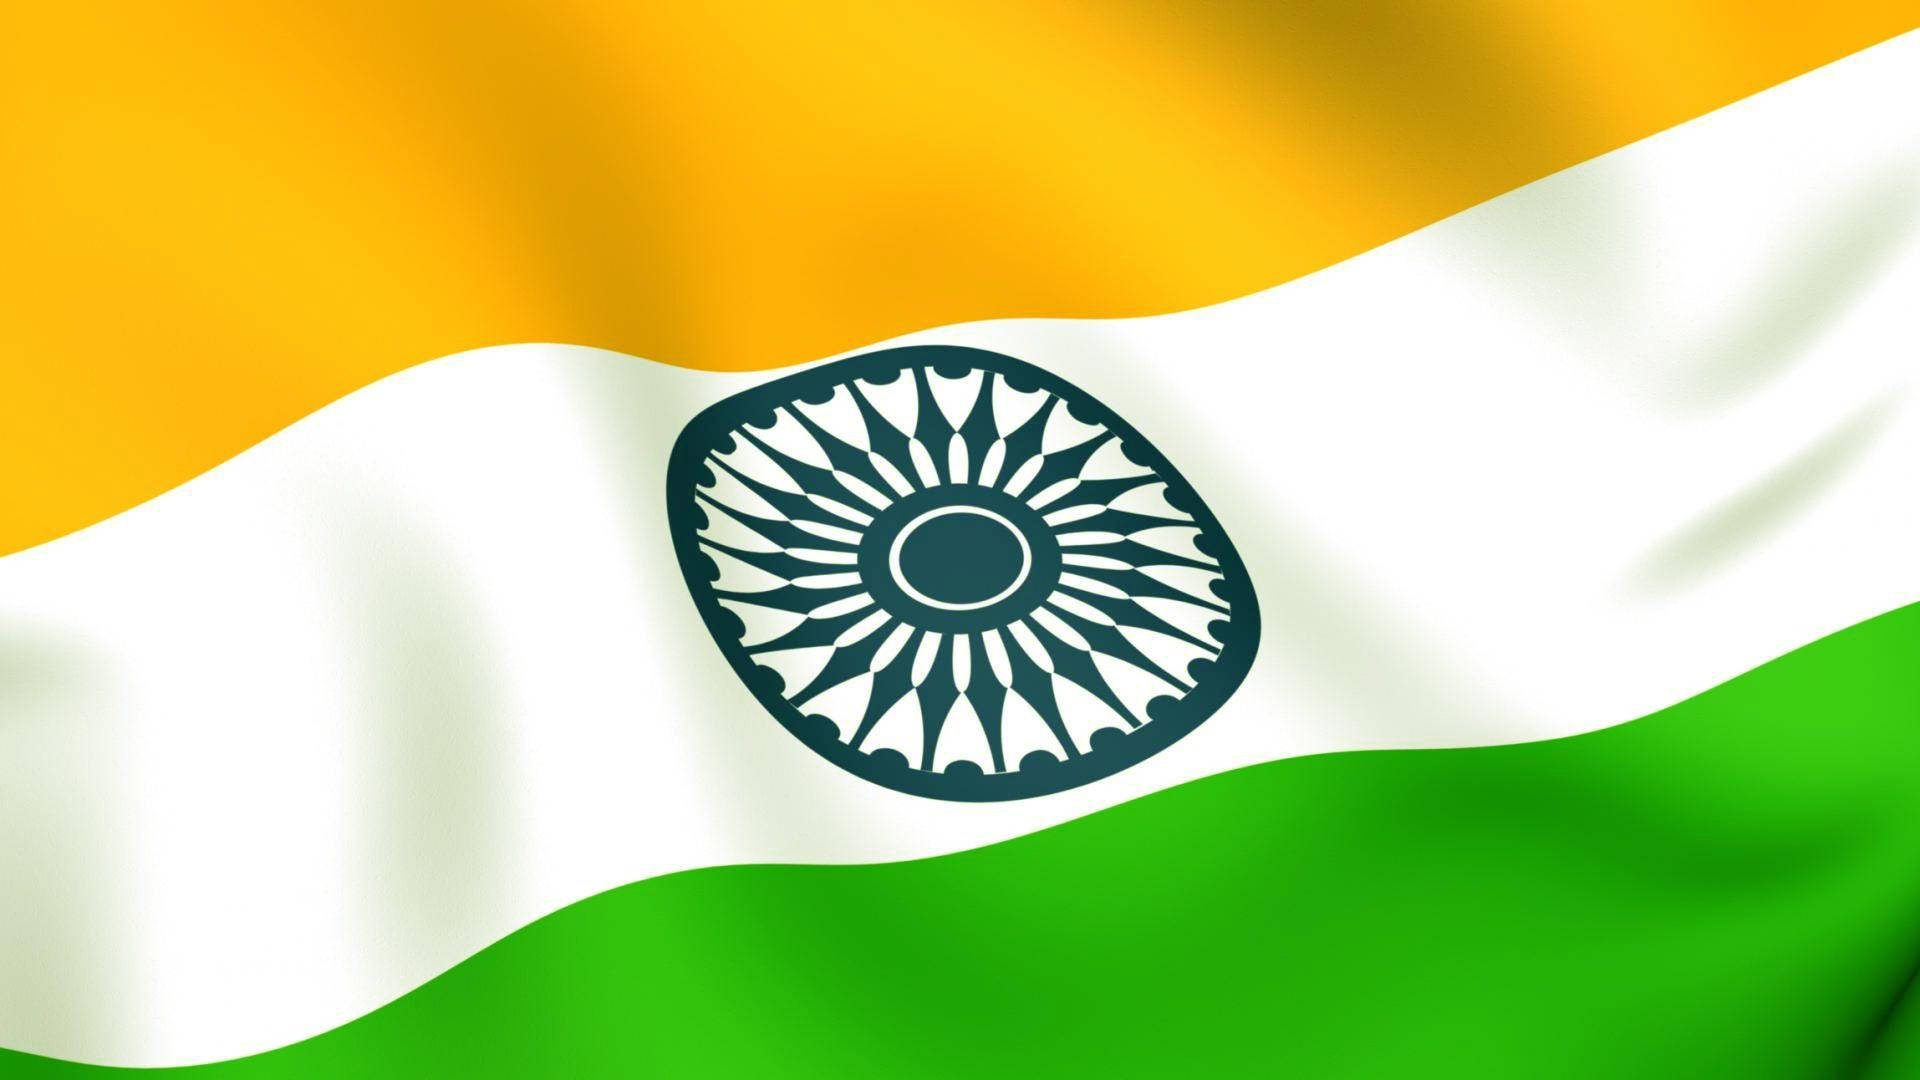 Download Indian Flag Hd Waving In The Wind Wallpaper 